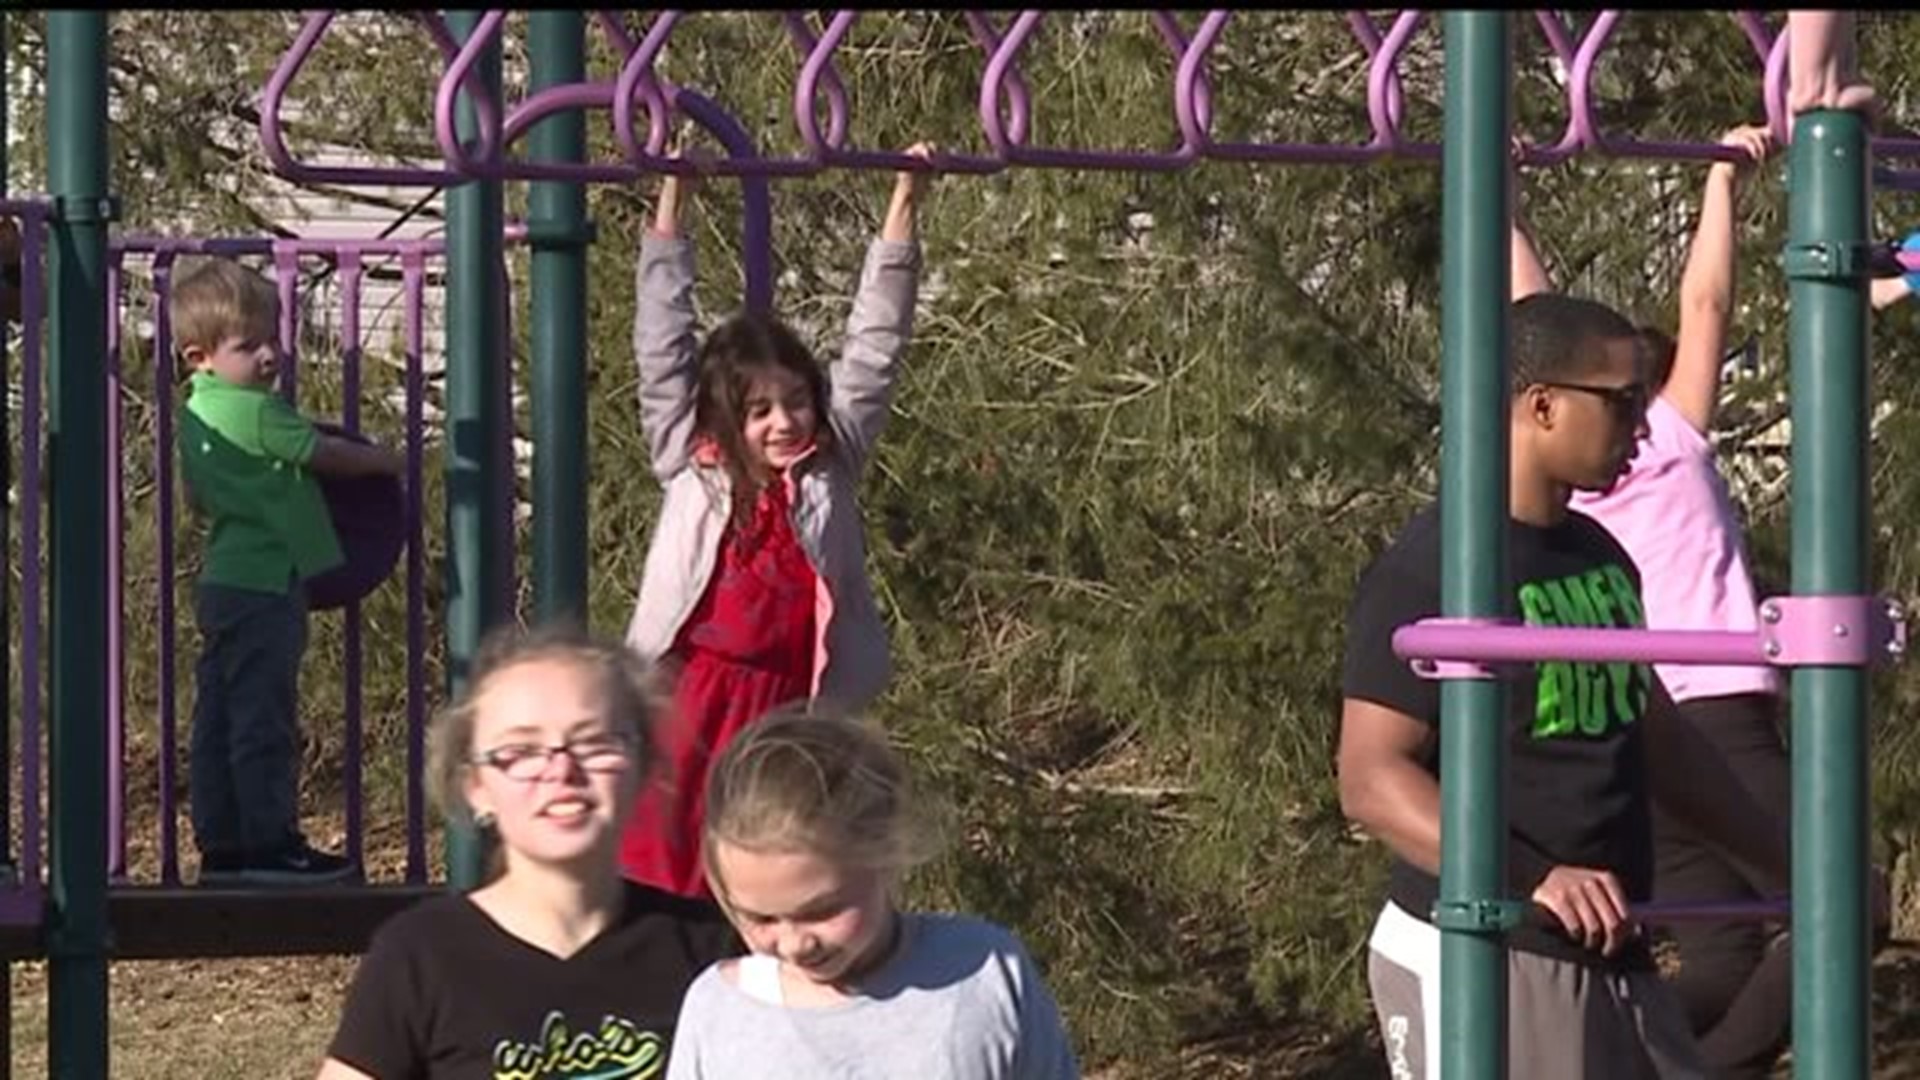 Inclusive playground for kids with disabilities coming to Lancaster Co.